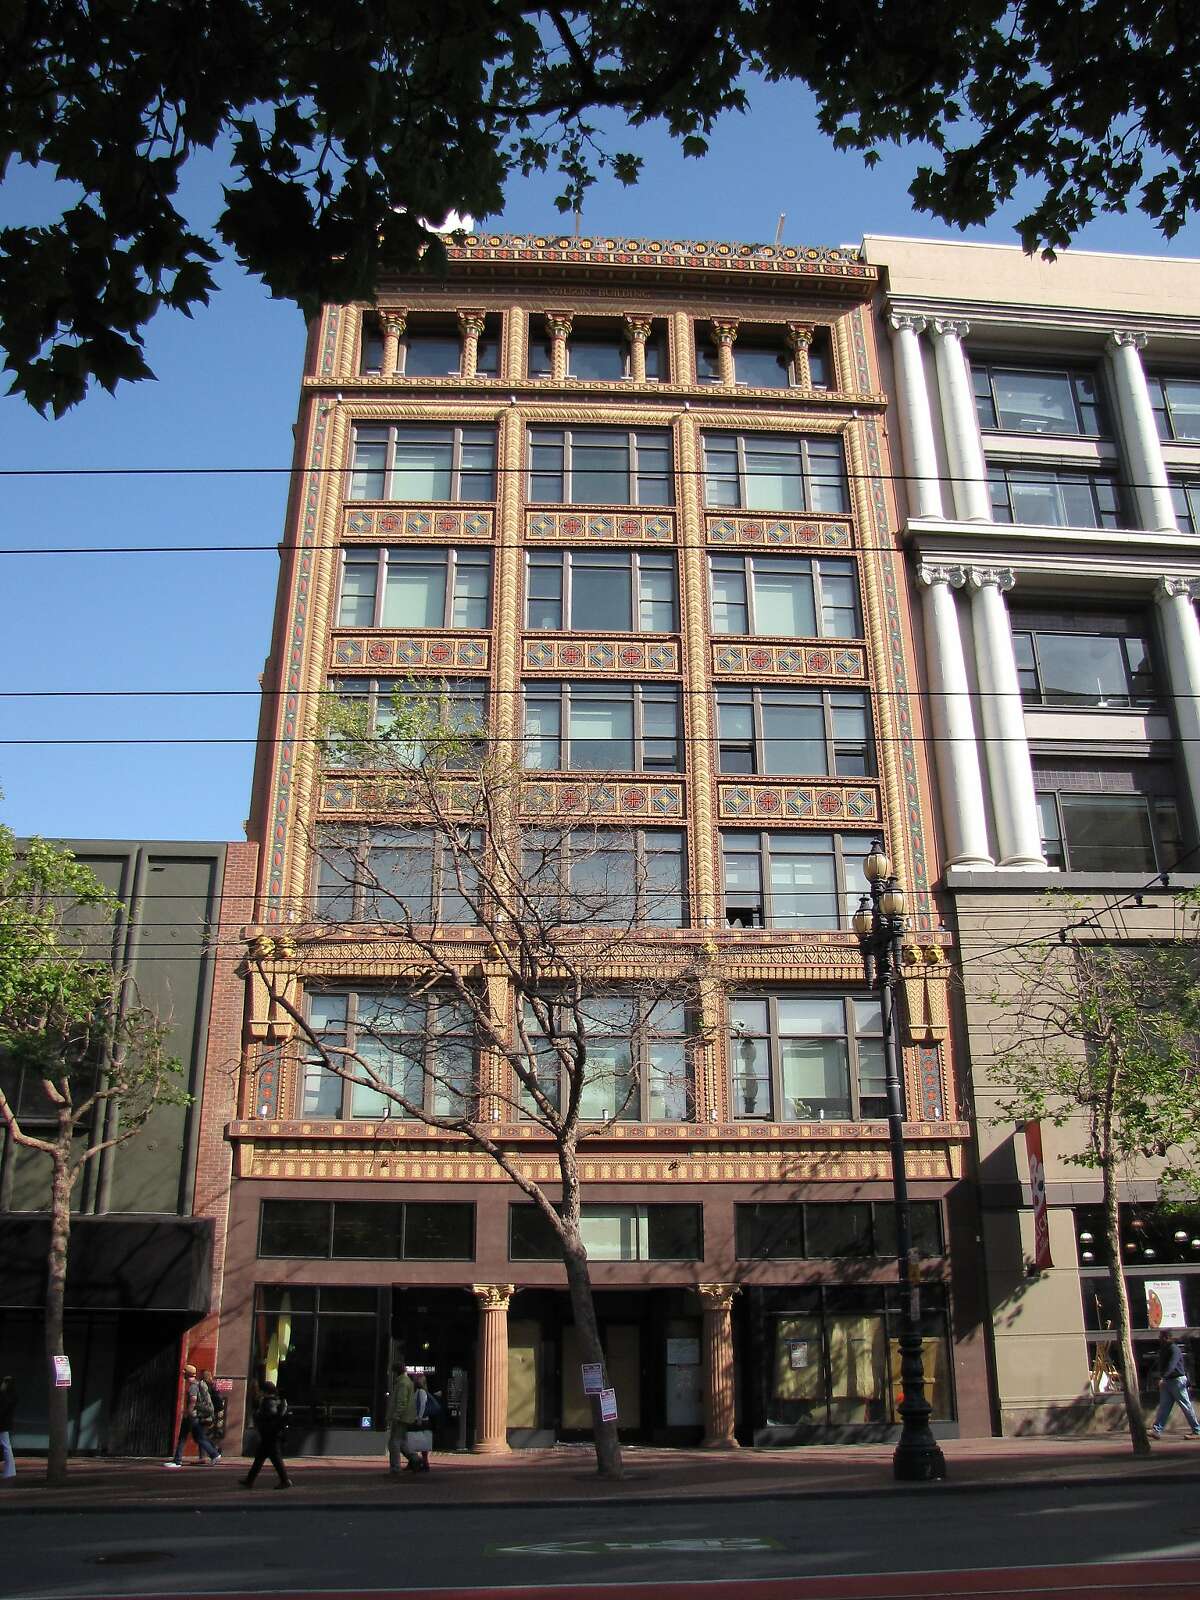 Now known as The Wilson, this seven-story building at 973 Market St. has endured more than a century of ups and downs as the blocks around it changed. The original architects were G.W. Percy and Willis Polk. According to an article when the project was announced in 1900, the inspiration for the tile work was the 6th century Basilica of San Vitale in Ravenna, Italy.